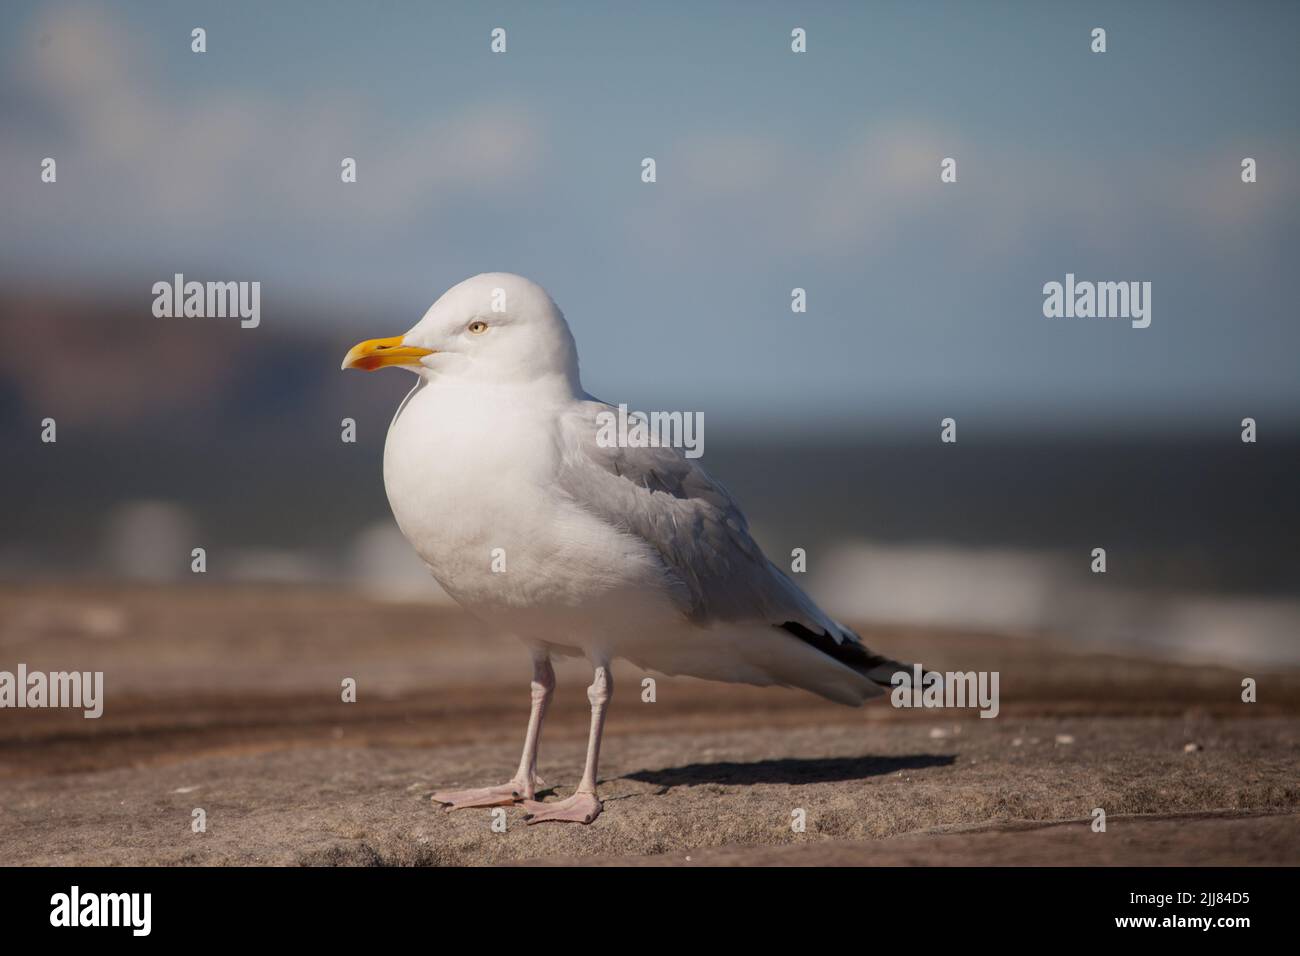 common herring gull Larus argentatus standing on a wall with a blue background selective focus Stock Photo